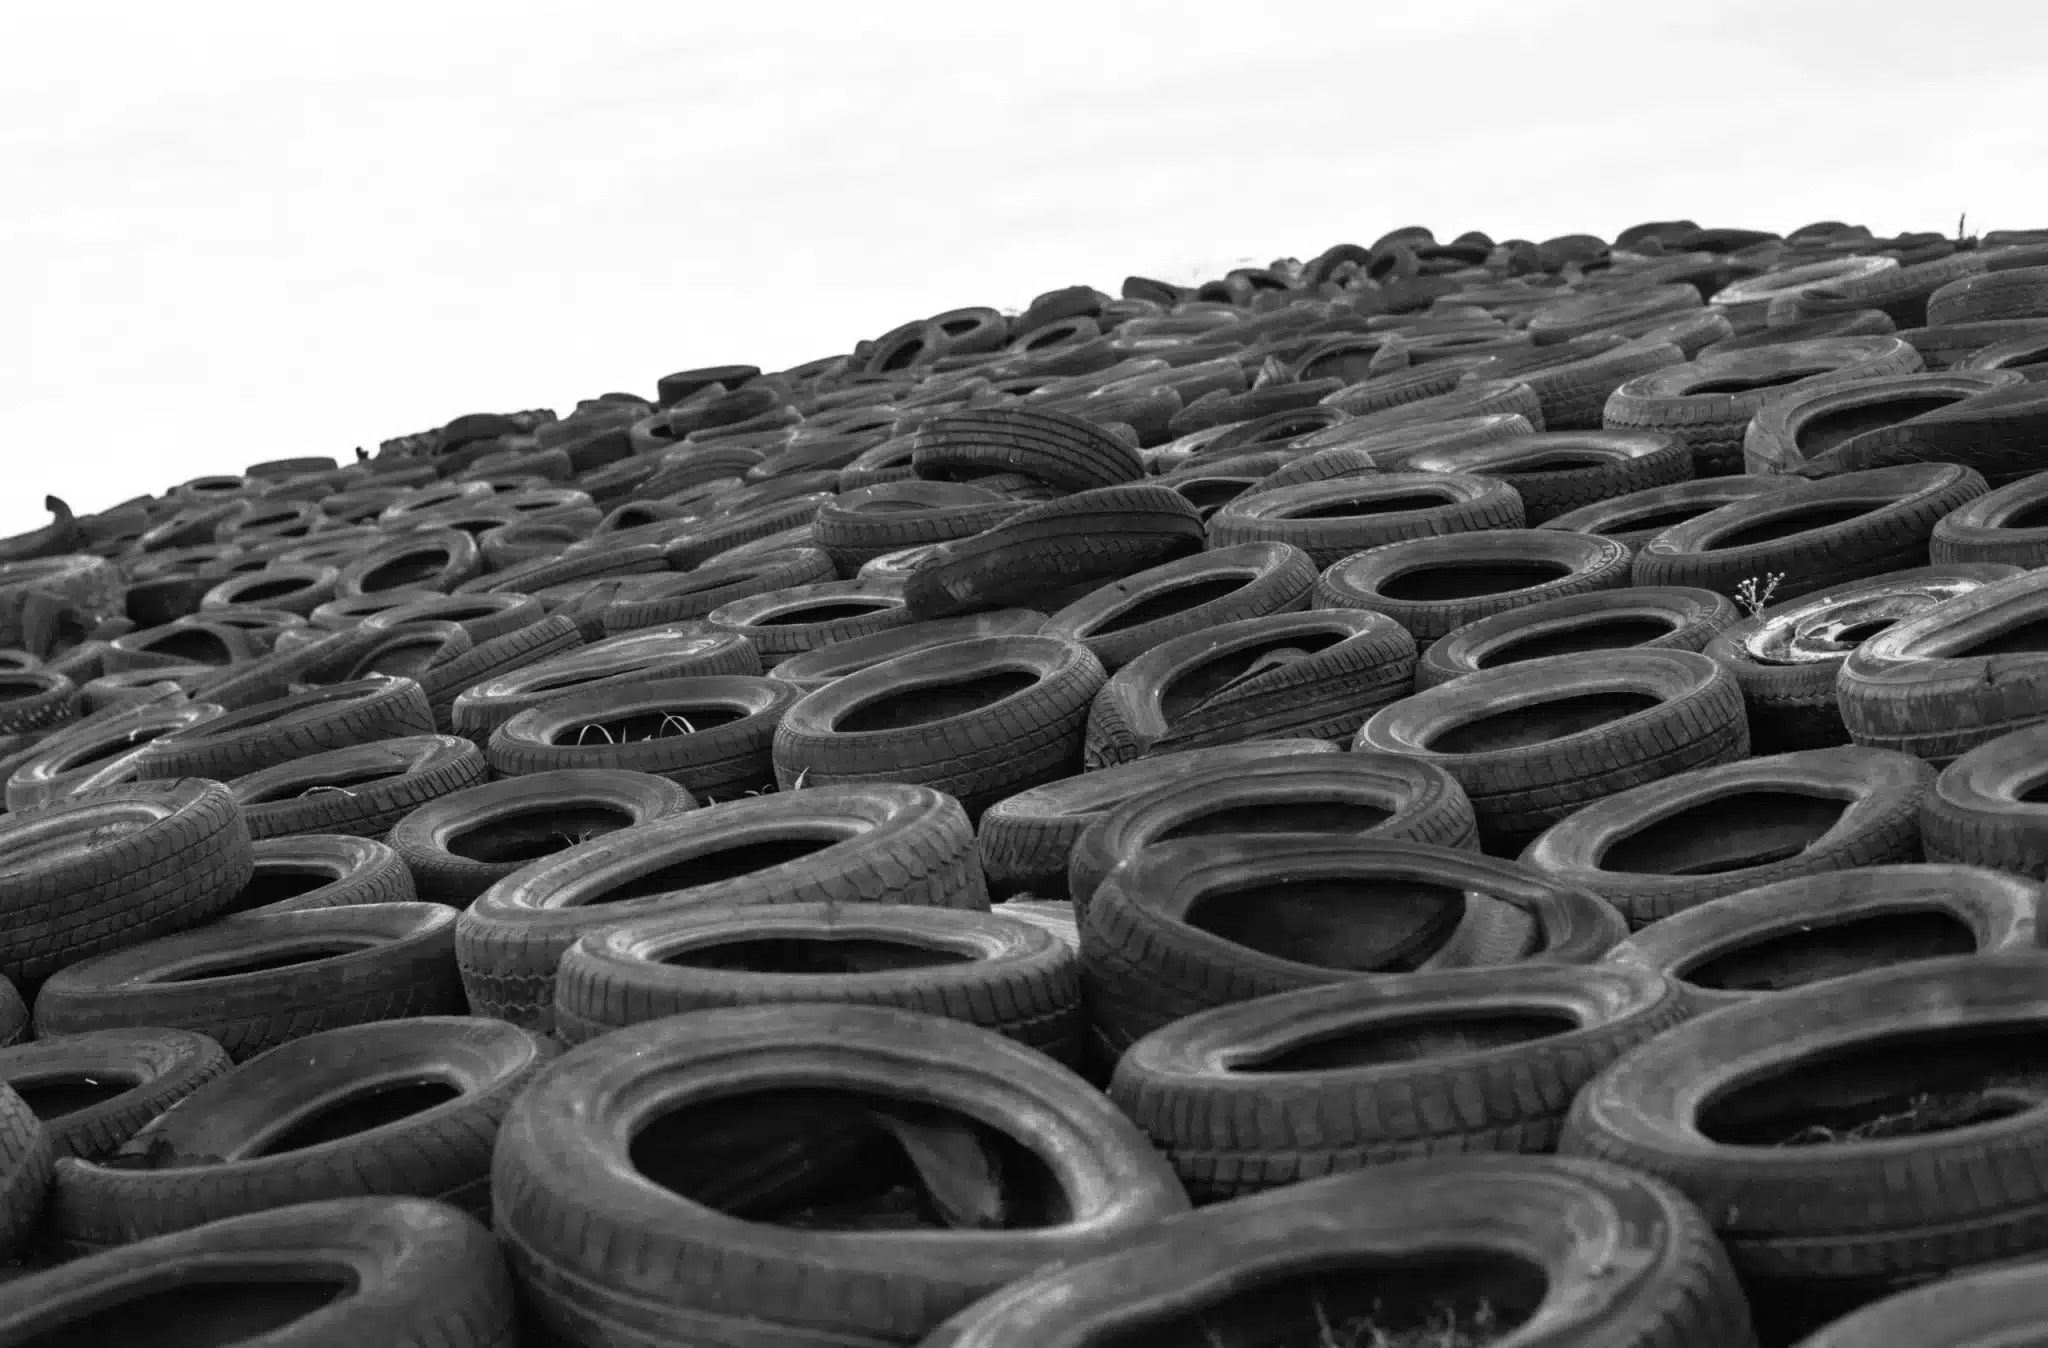 A black and white photo capturing a vast pile of discarded tires extending into the distance, symbolizing issues of waste and recycling in modern society. The image shows the varied sizes and worn textures of the tires, starkly piled against a pale sky.